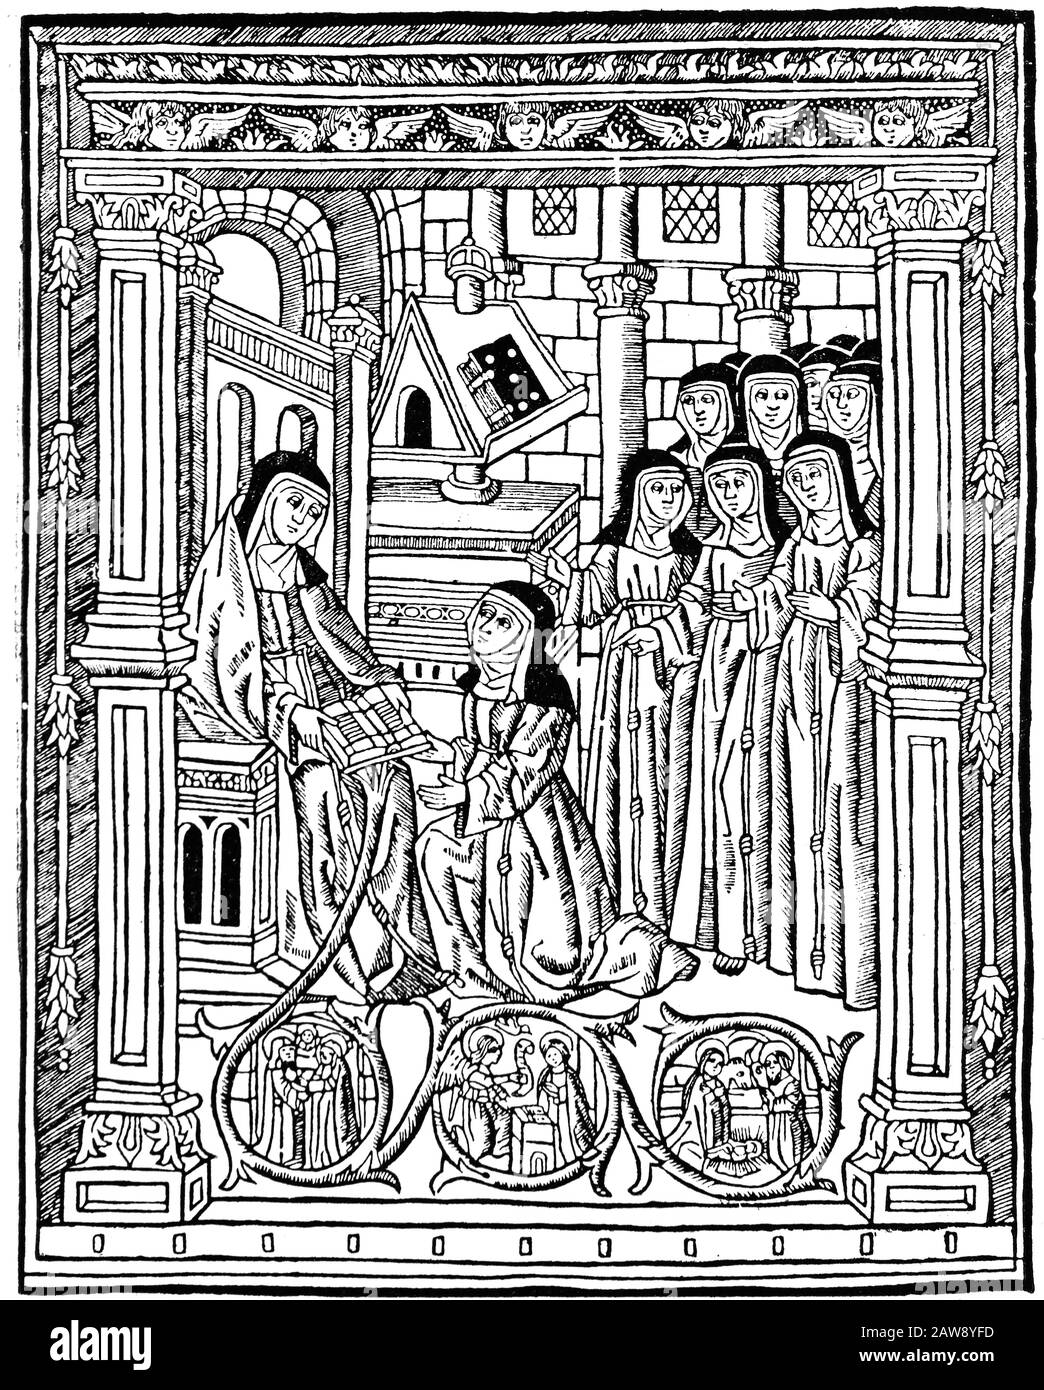 Abbess of Isabel de Villena (1430-1490) delivering her work  Vita Christi (Christ Life) to her Clarises nuns, Valencia, Spain. 1513 Stock Photo